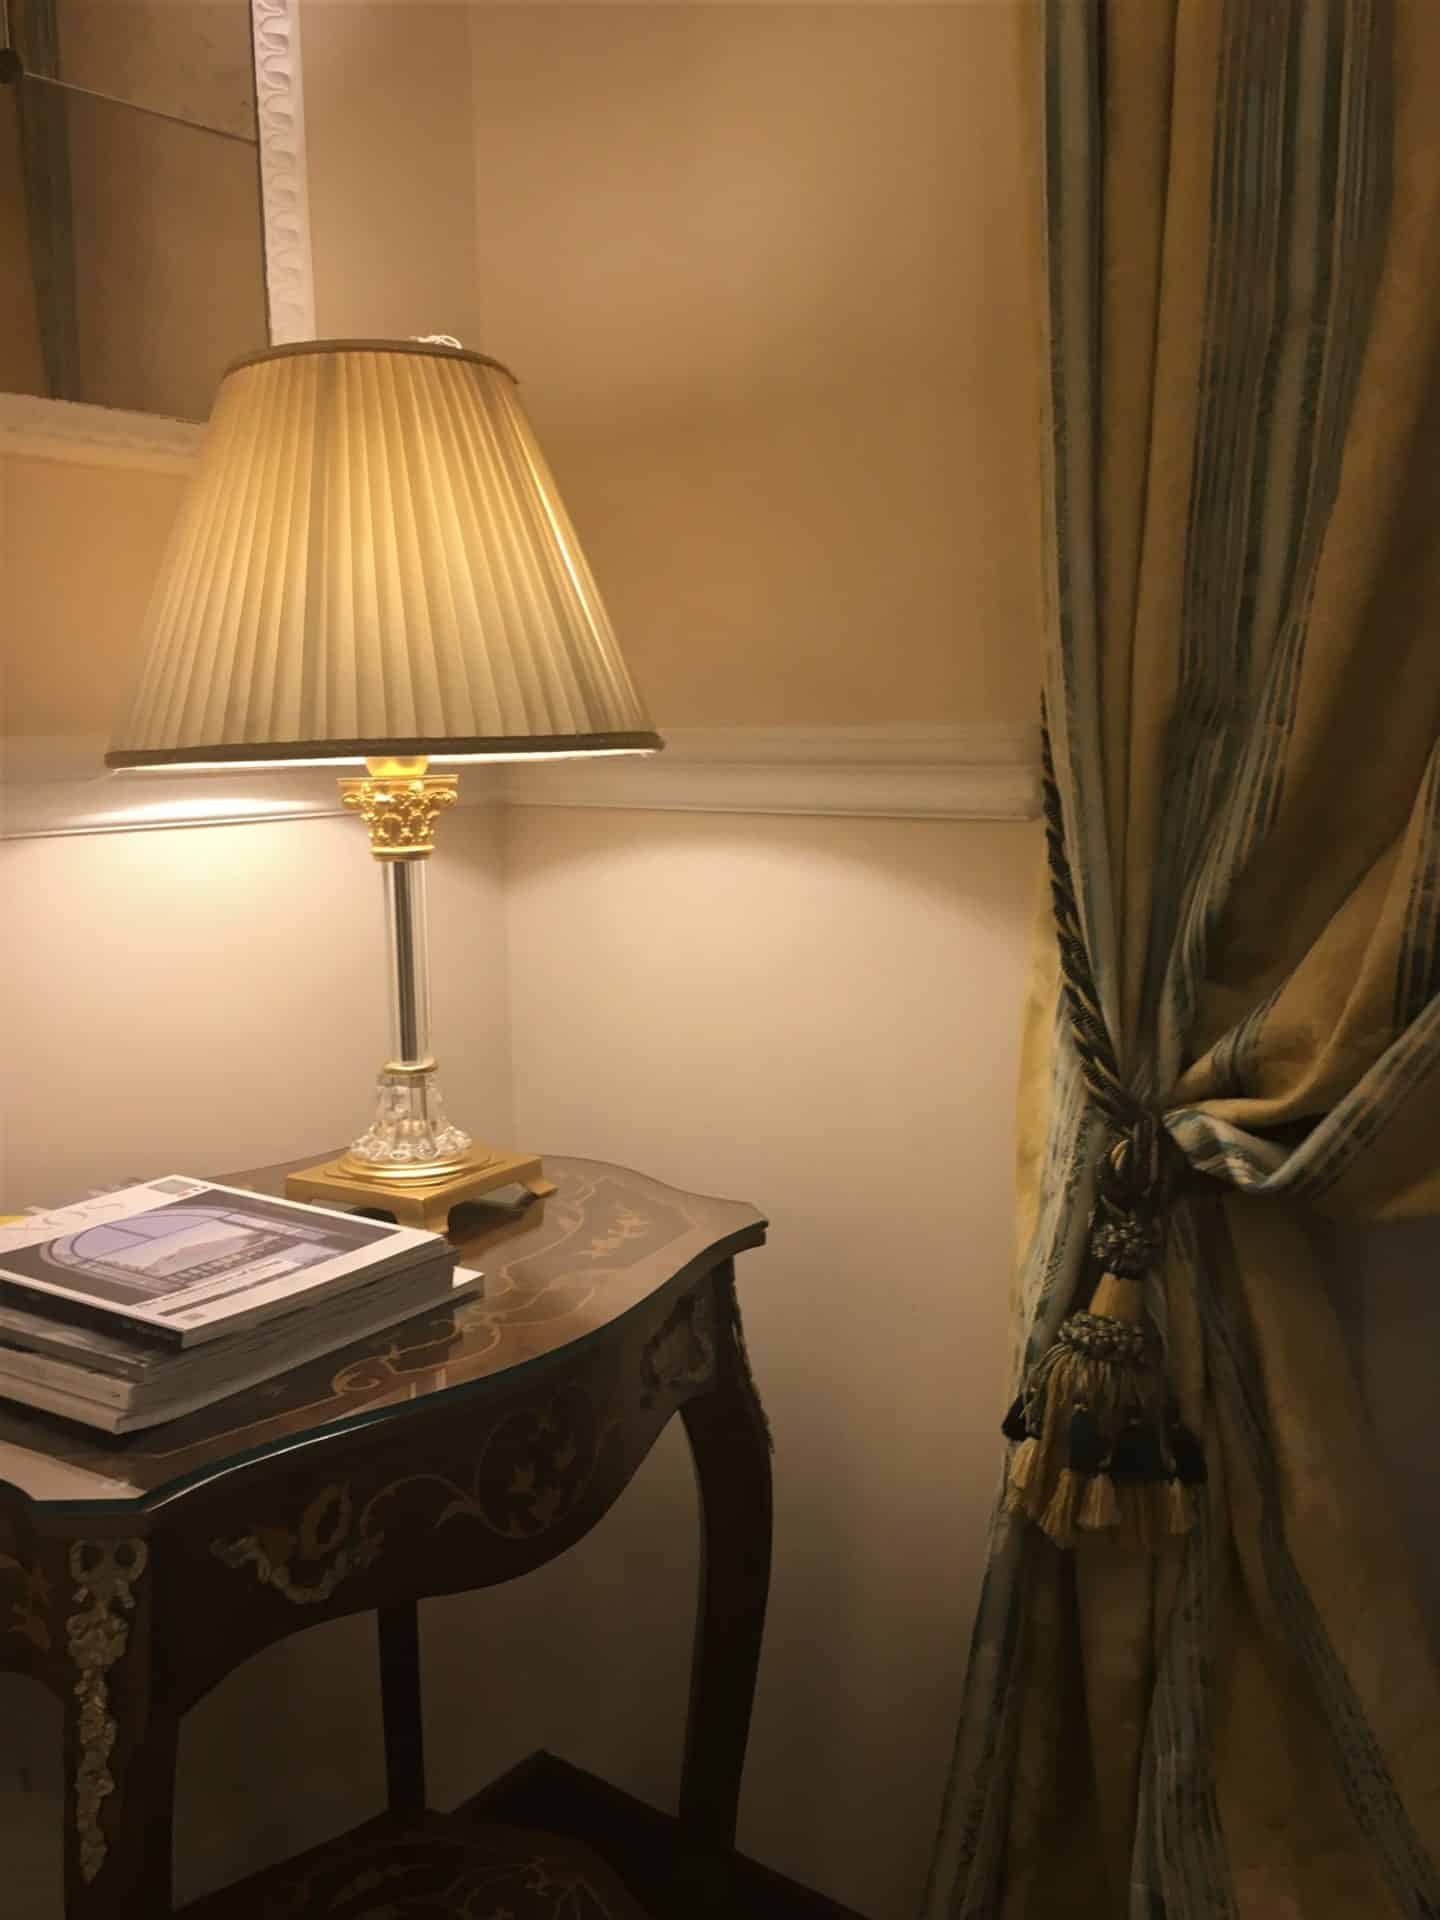 The Opulent Bernini Palace Hotel superior room with a brown bedside table and lamp which is one and bright through the pale green lampshade. There are 2 books on the table and in the corder there is the ceiling to floor long pale green and olive green draped curtains with ties backs